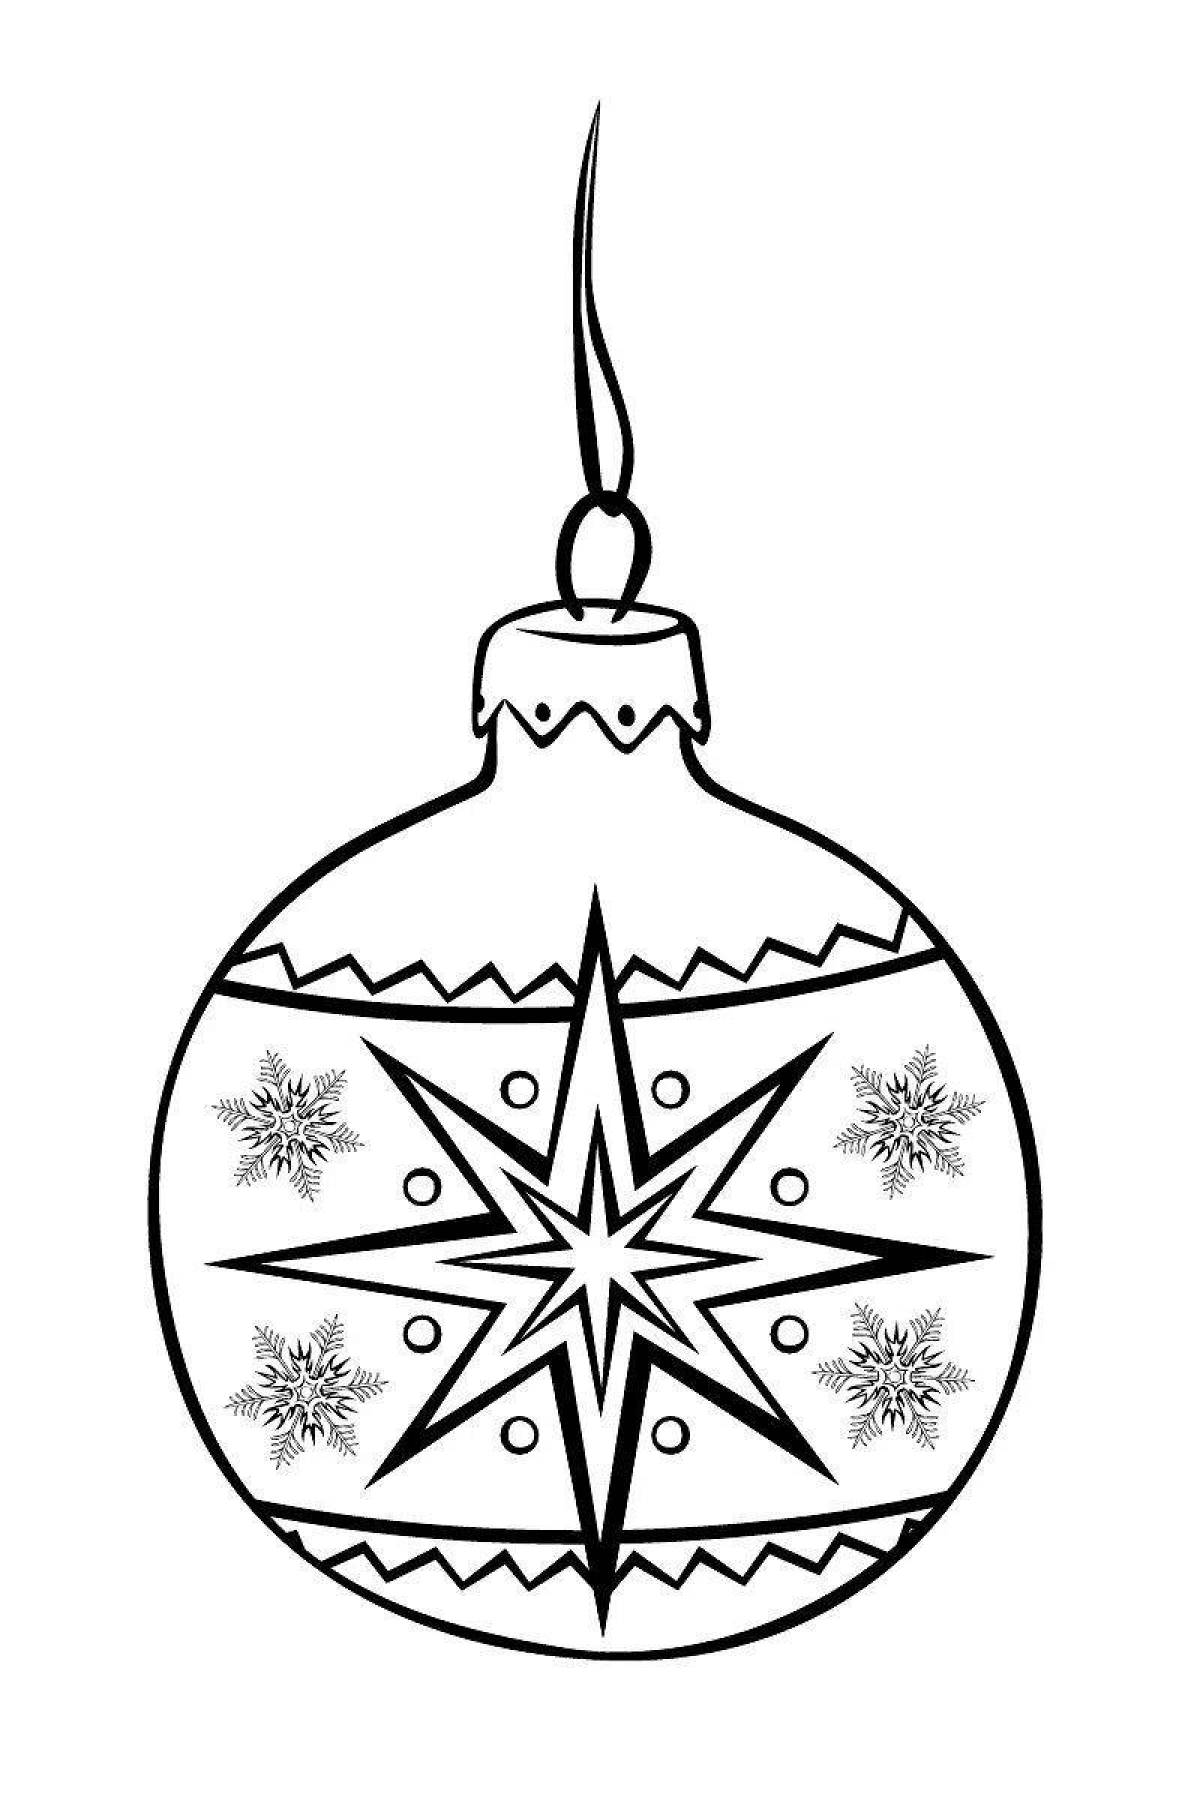 Coloring book luxury Christmas ball for kids